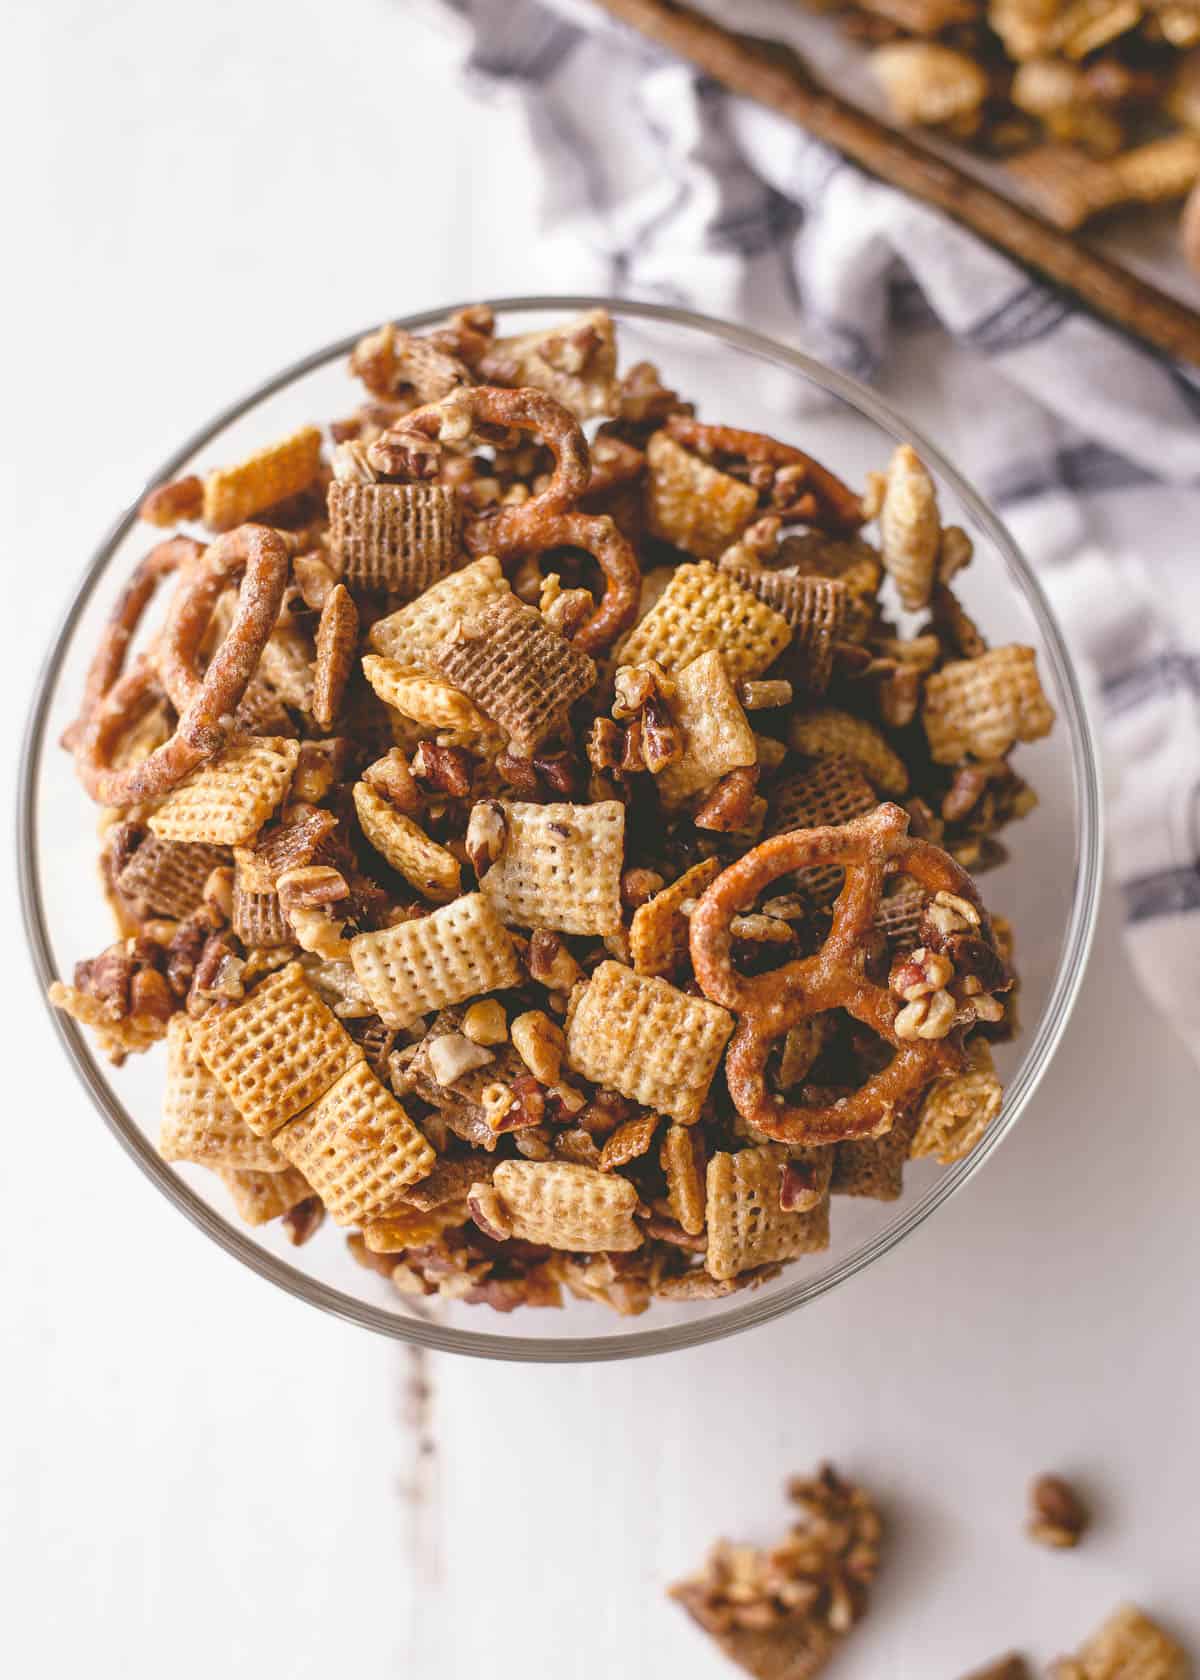 snack mix in a clear glass bowl